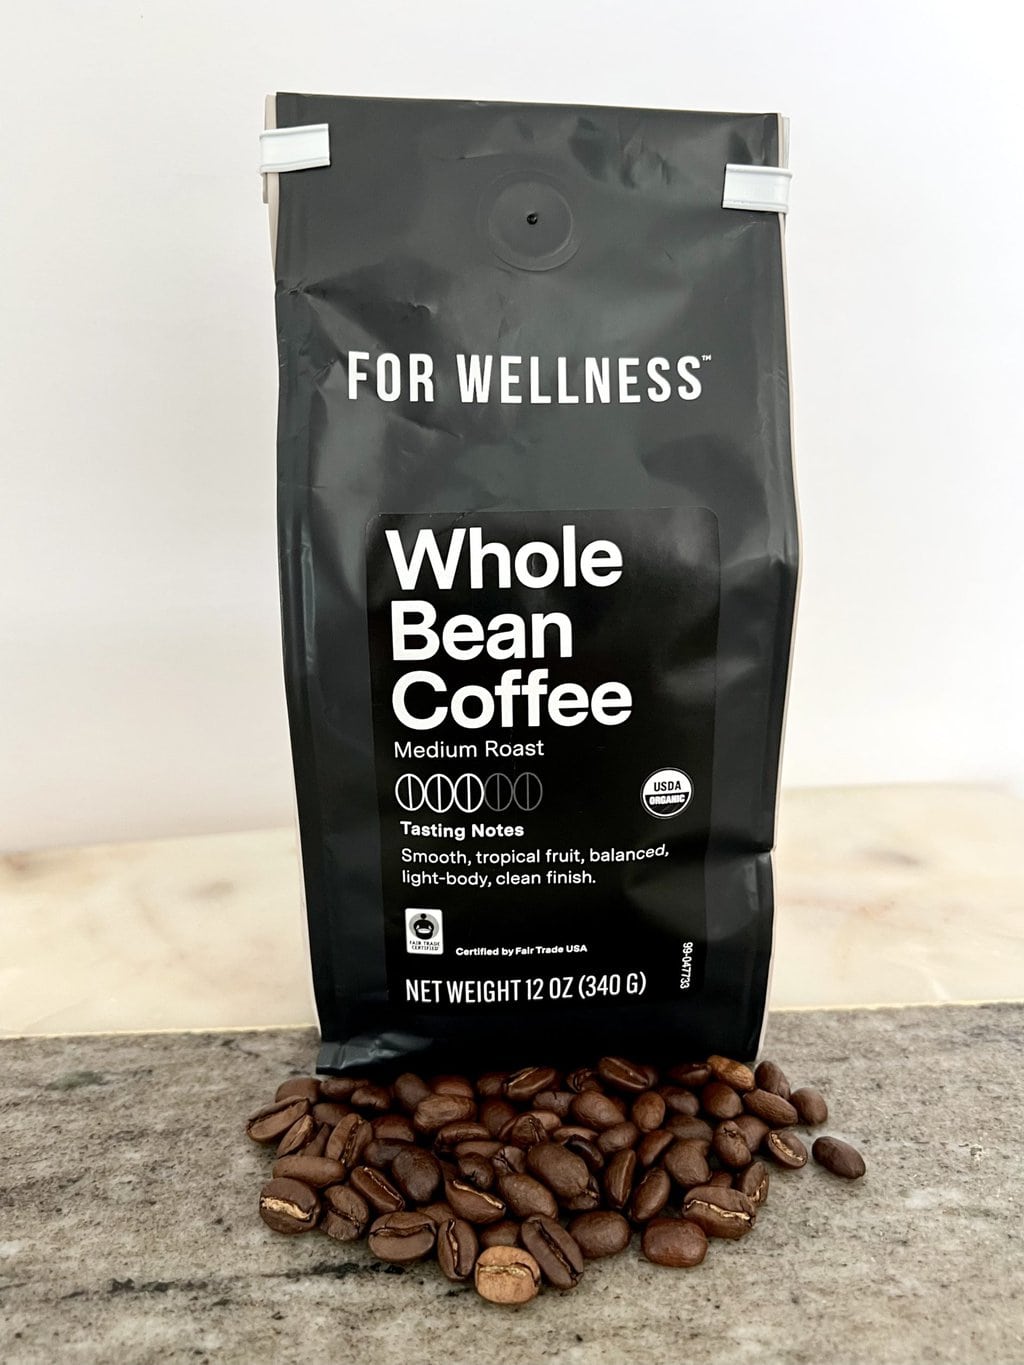 For Wellness Whole Bean Coffee Medium Roast Coffee package stands on coffee beans 